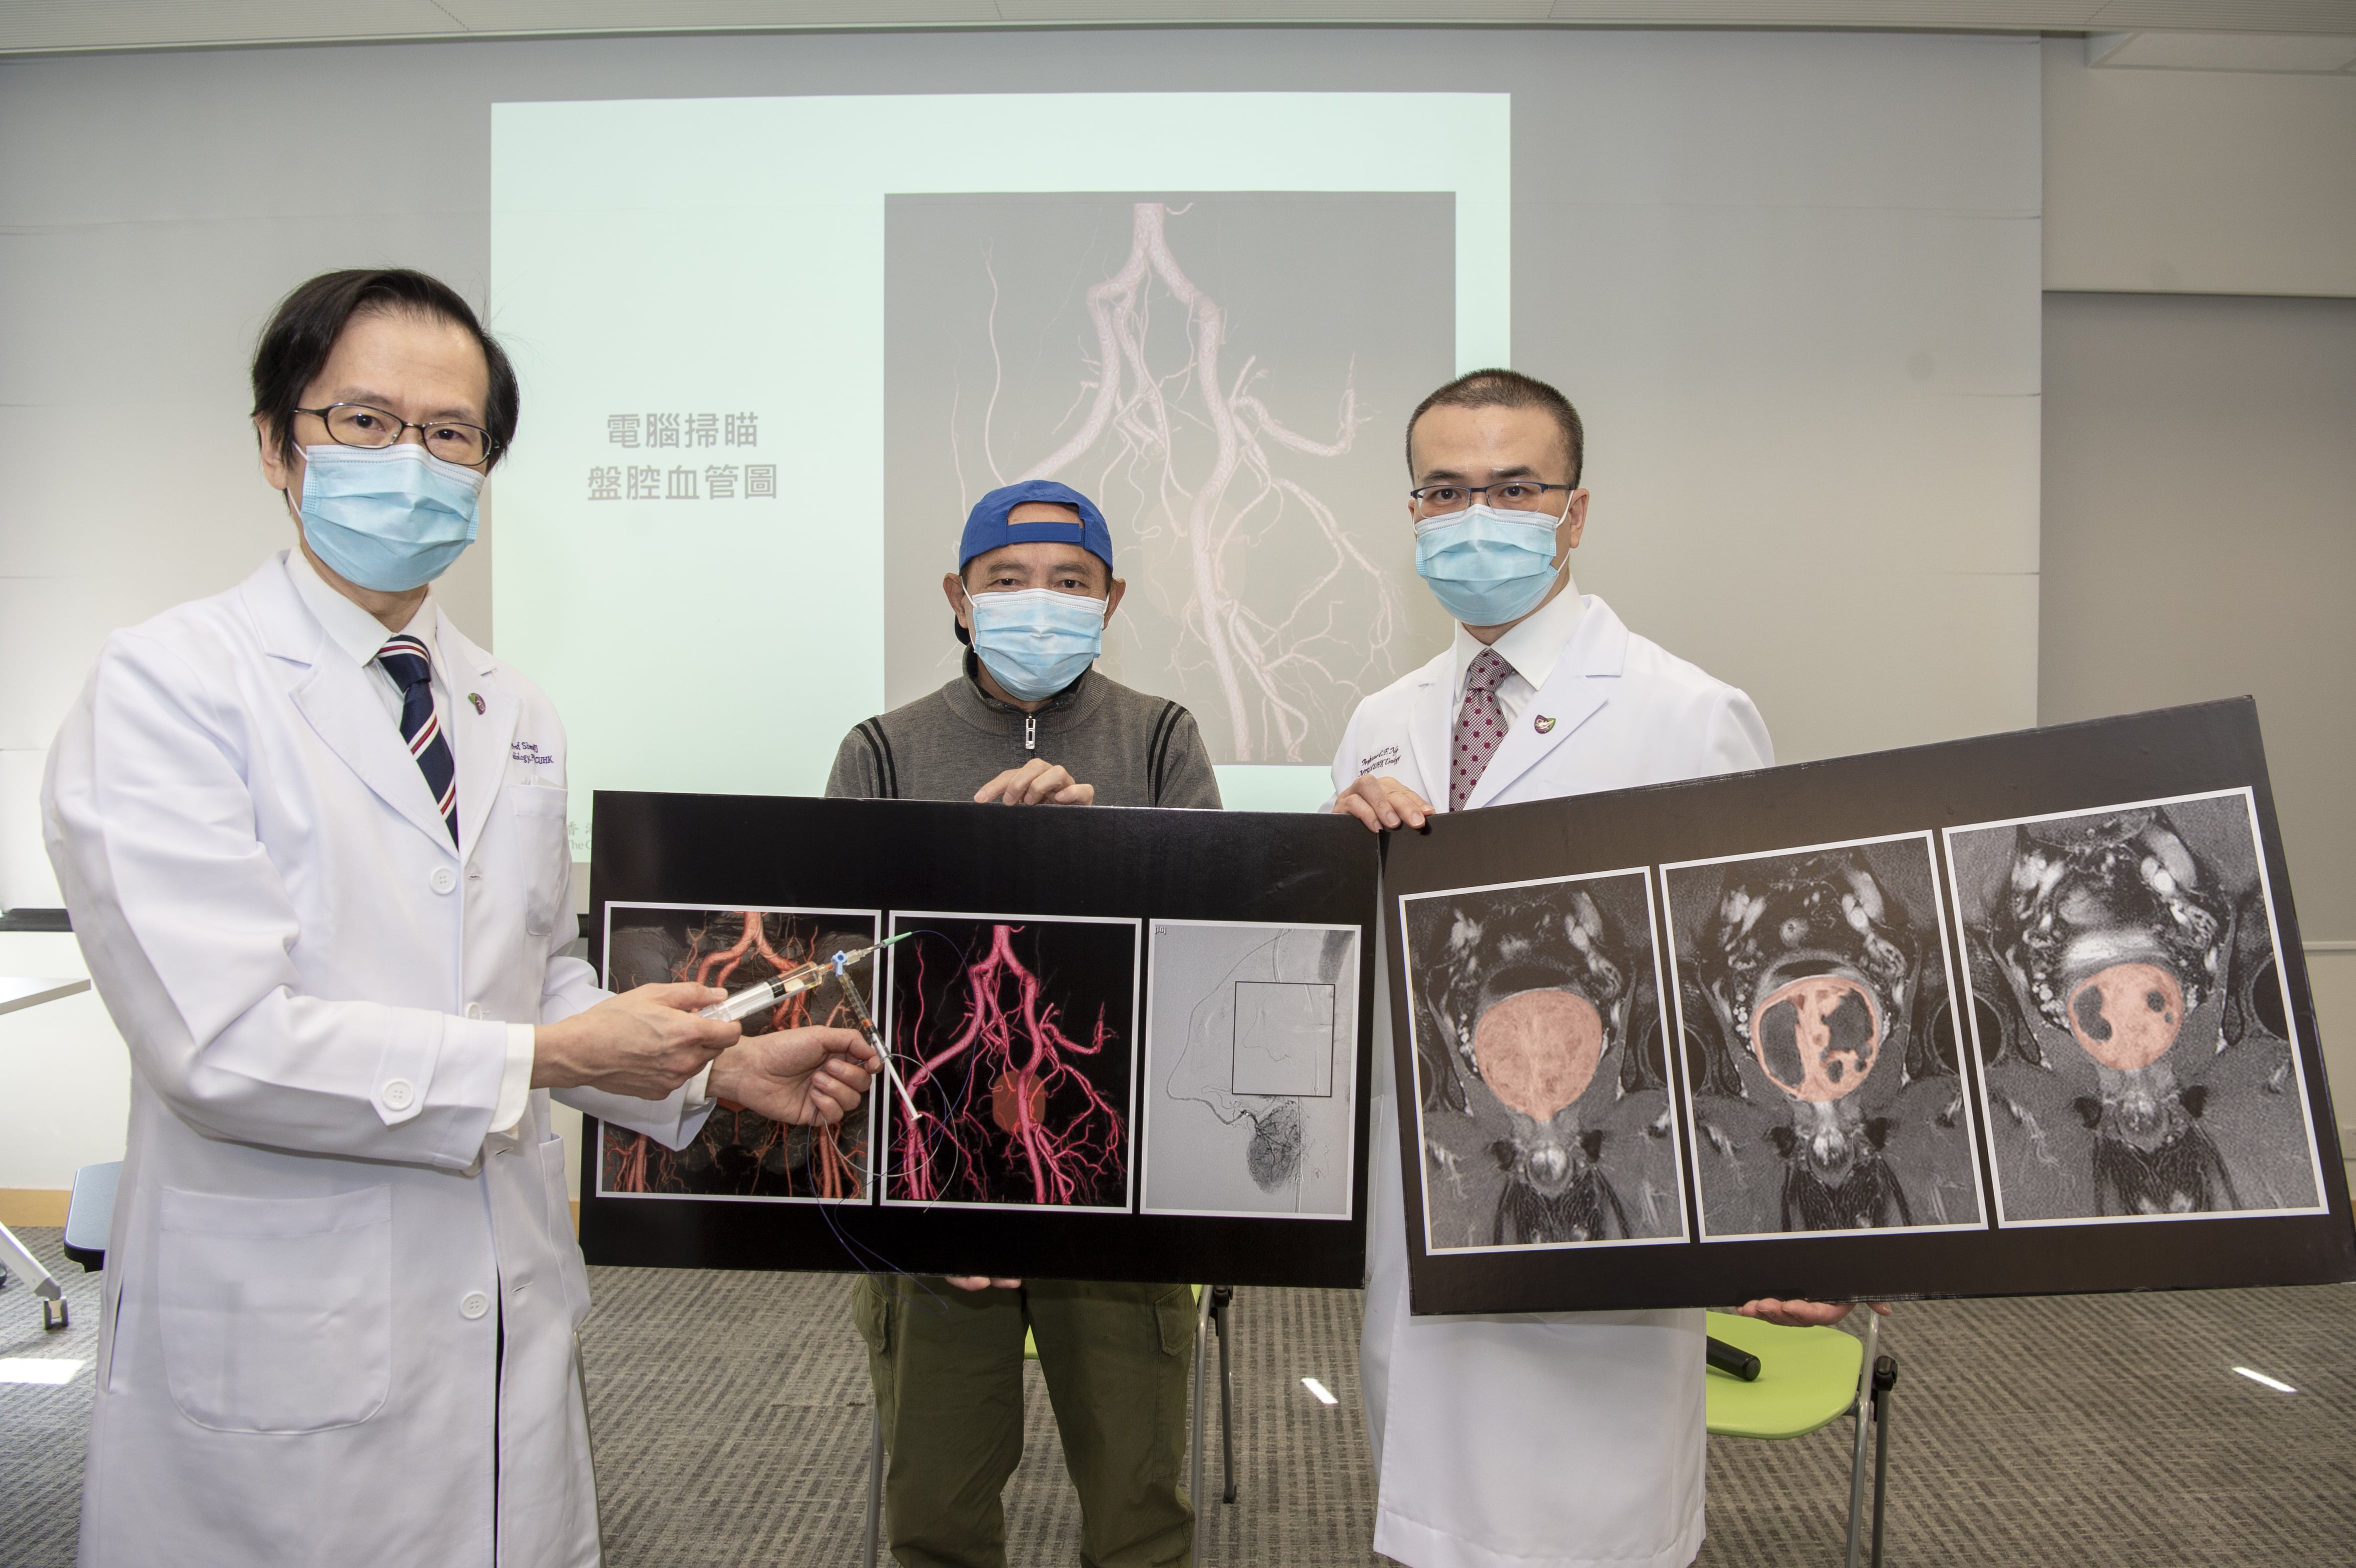 (From left) Professor Simon YU, BPH patient Mr. TAM and Professor Anthony NG